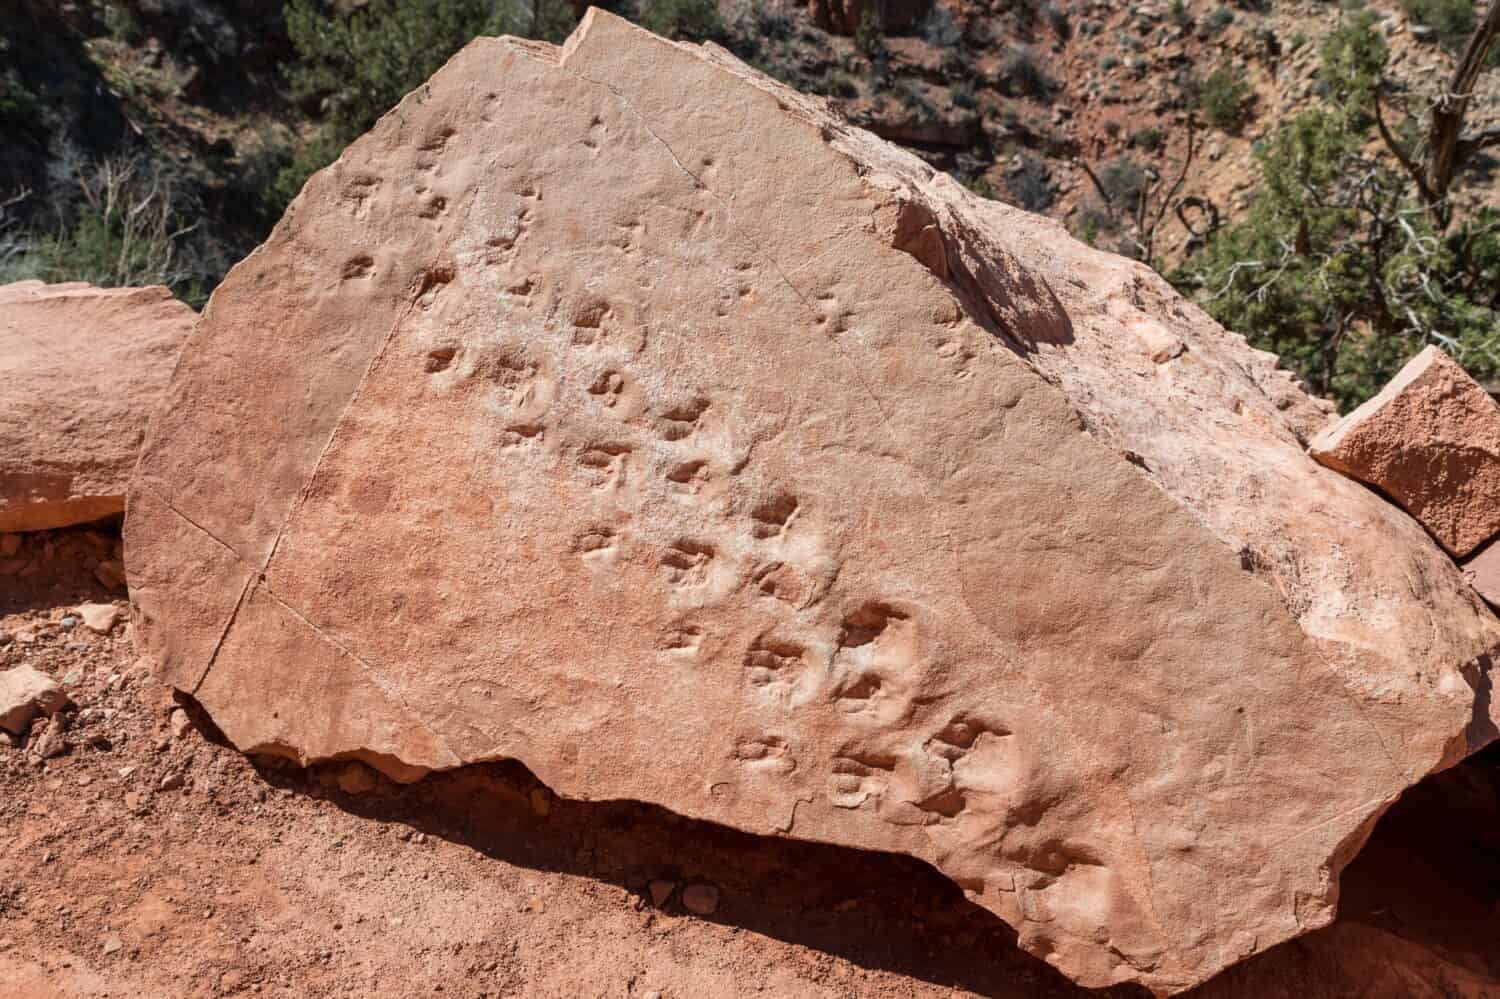 Fossilized footprints in a stone in Grand Canyon national park, Arizona, USA